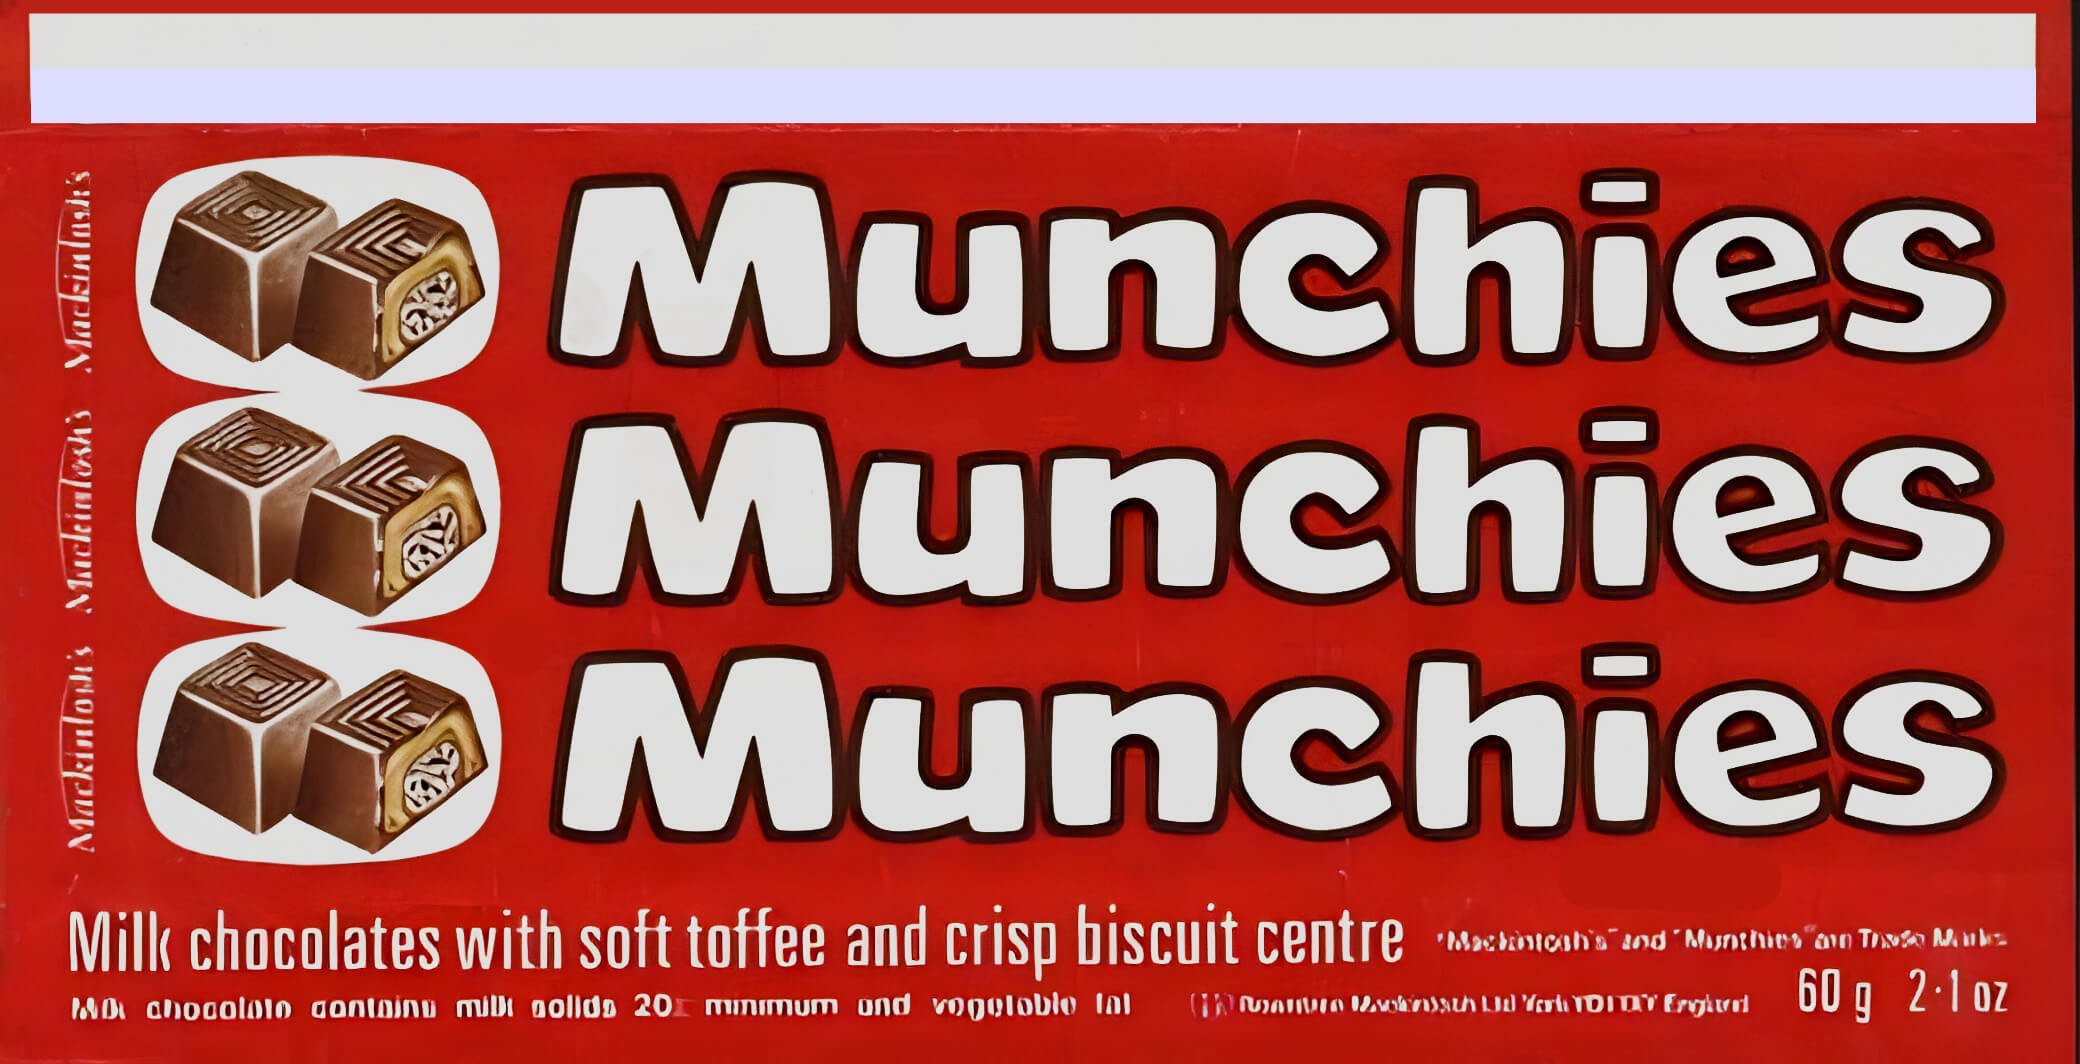 Mackintosh's Munchies wrapper from the 1970s. Red with white text.